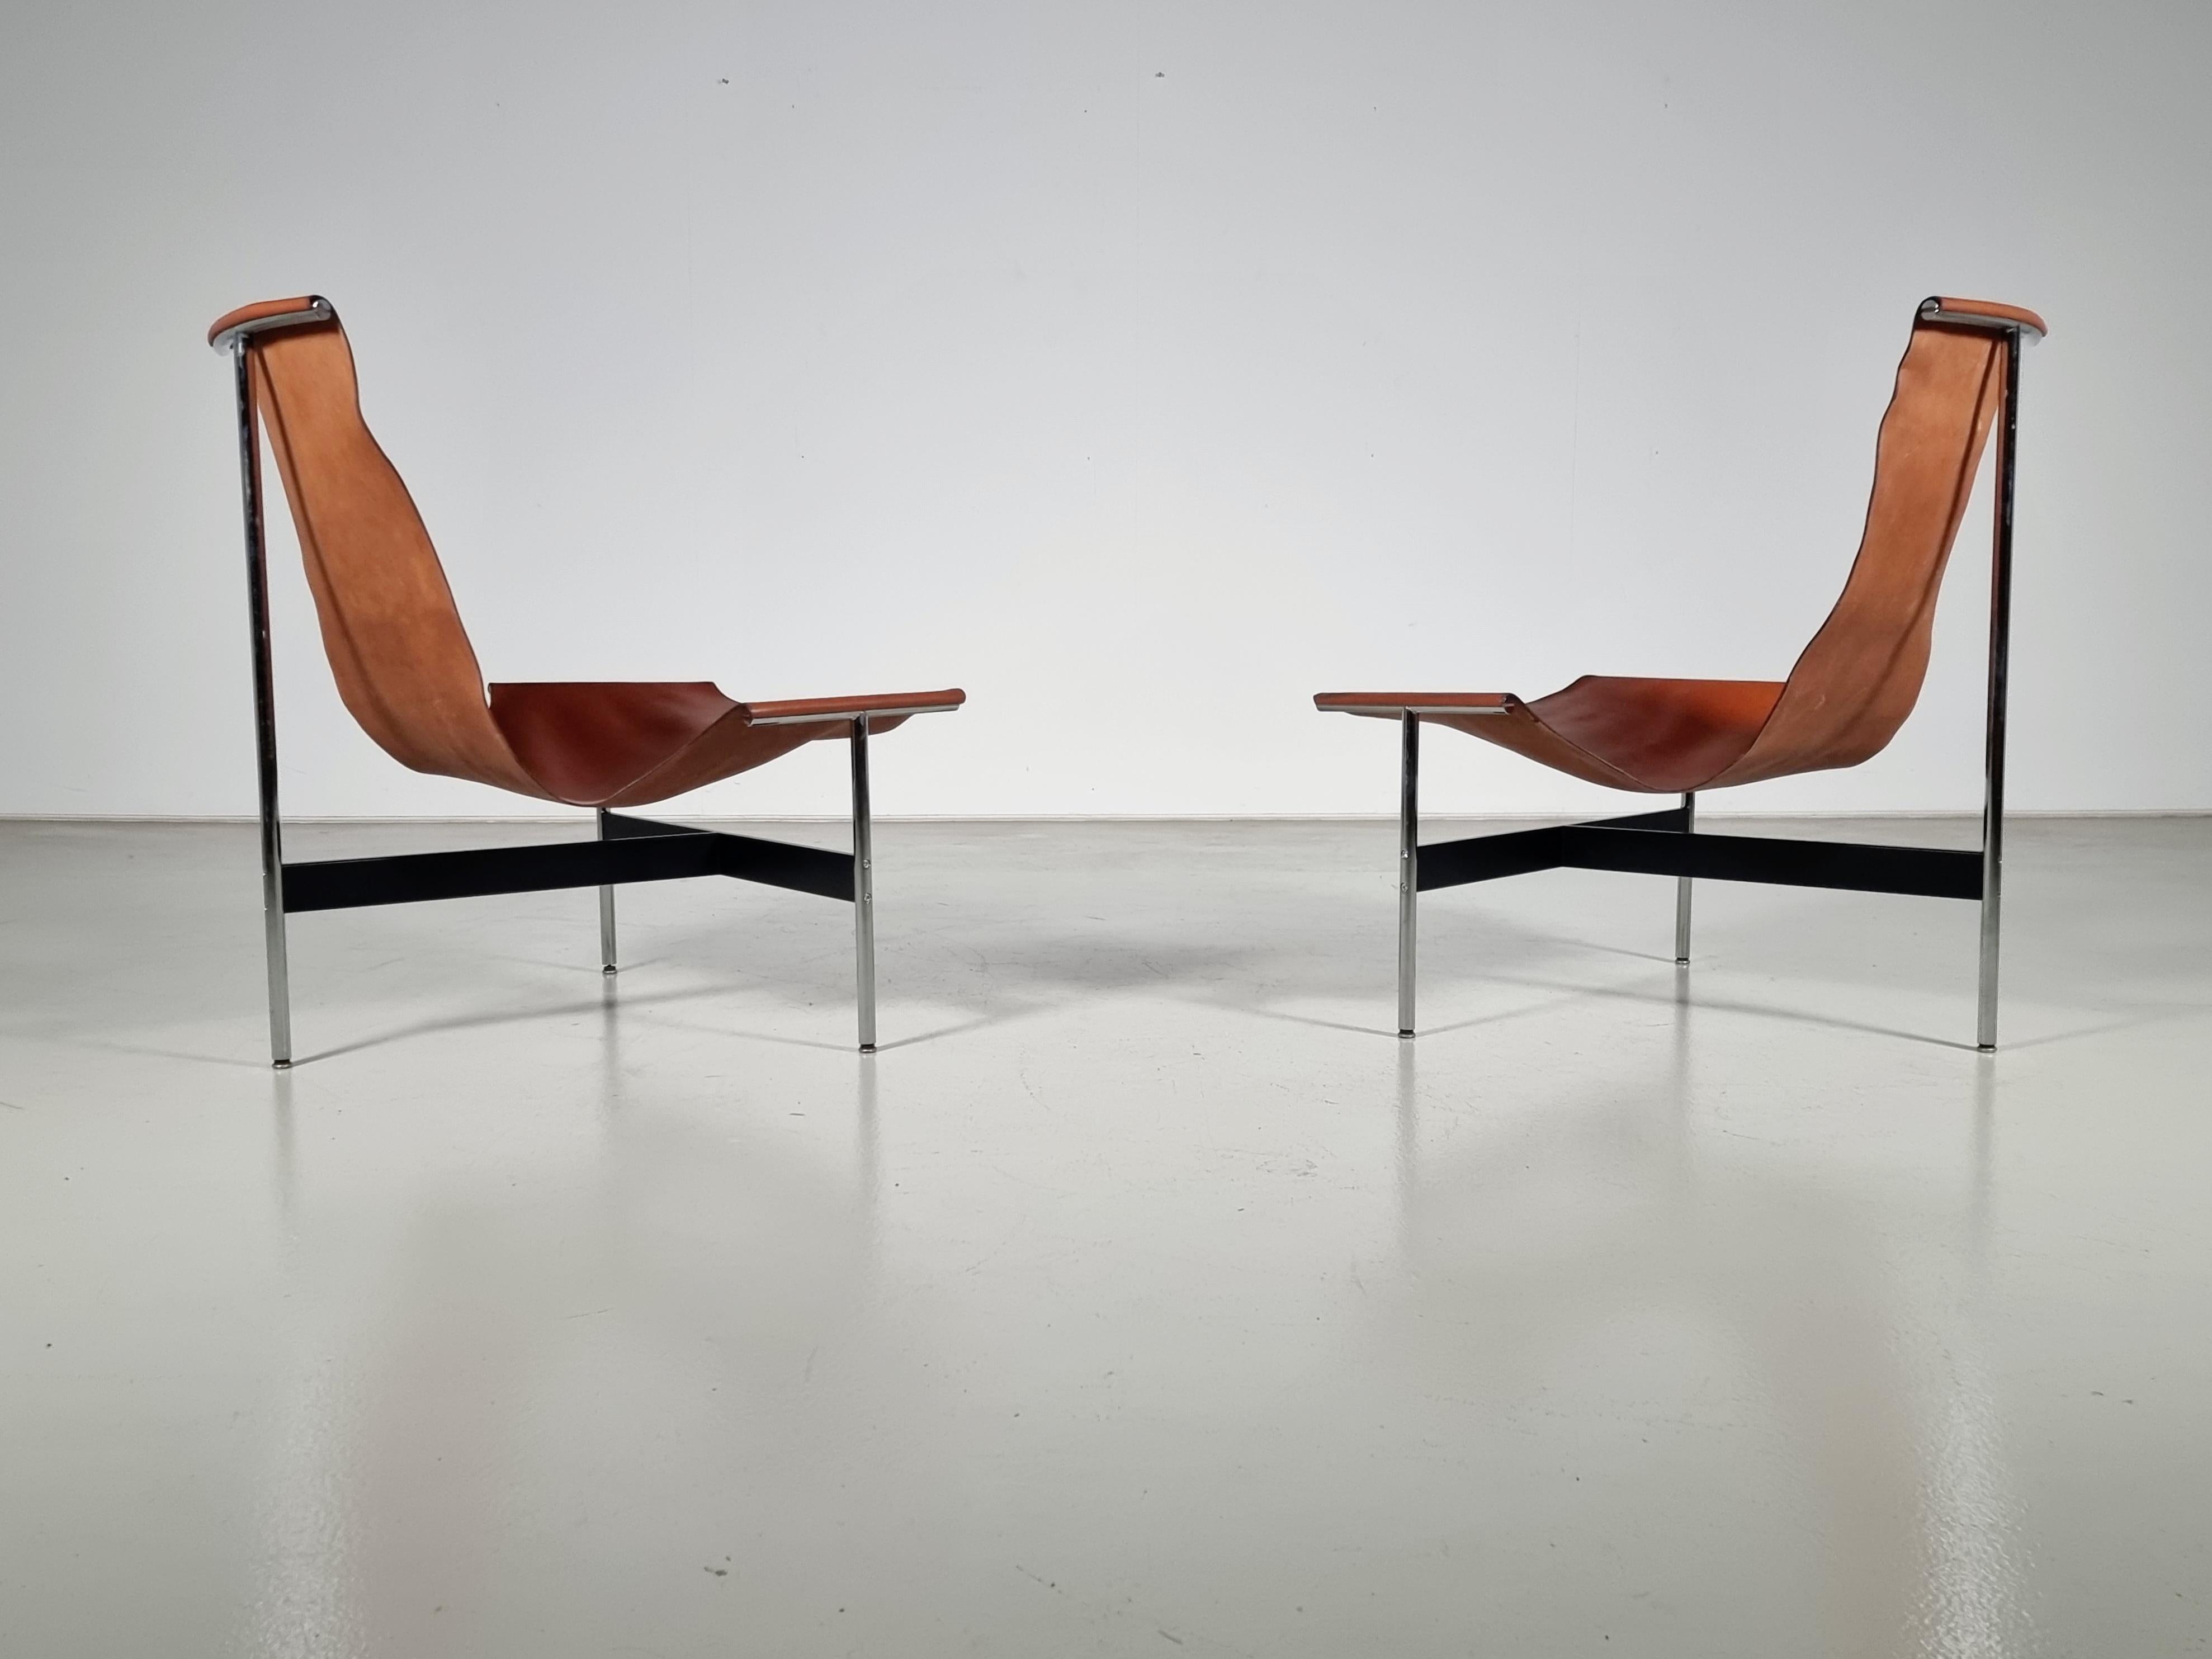 '3LC' T-Chairs by Katavolos, Littell and Kelley for Laverne International, 1950s For Sale 1